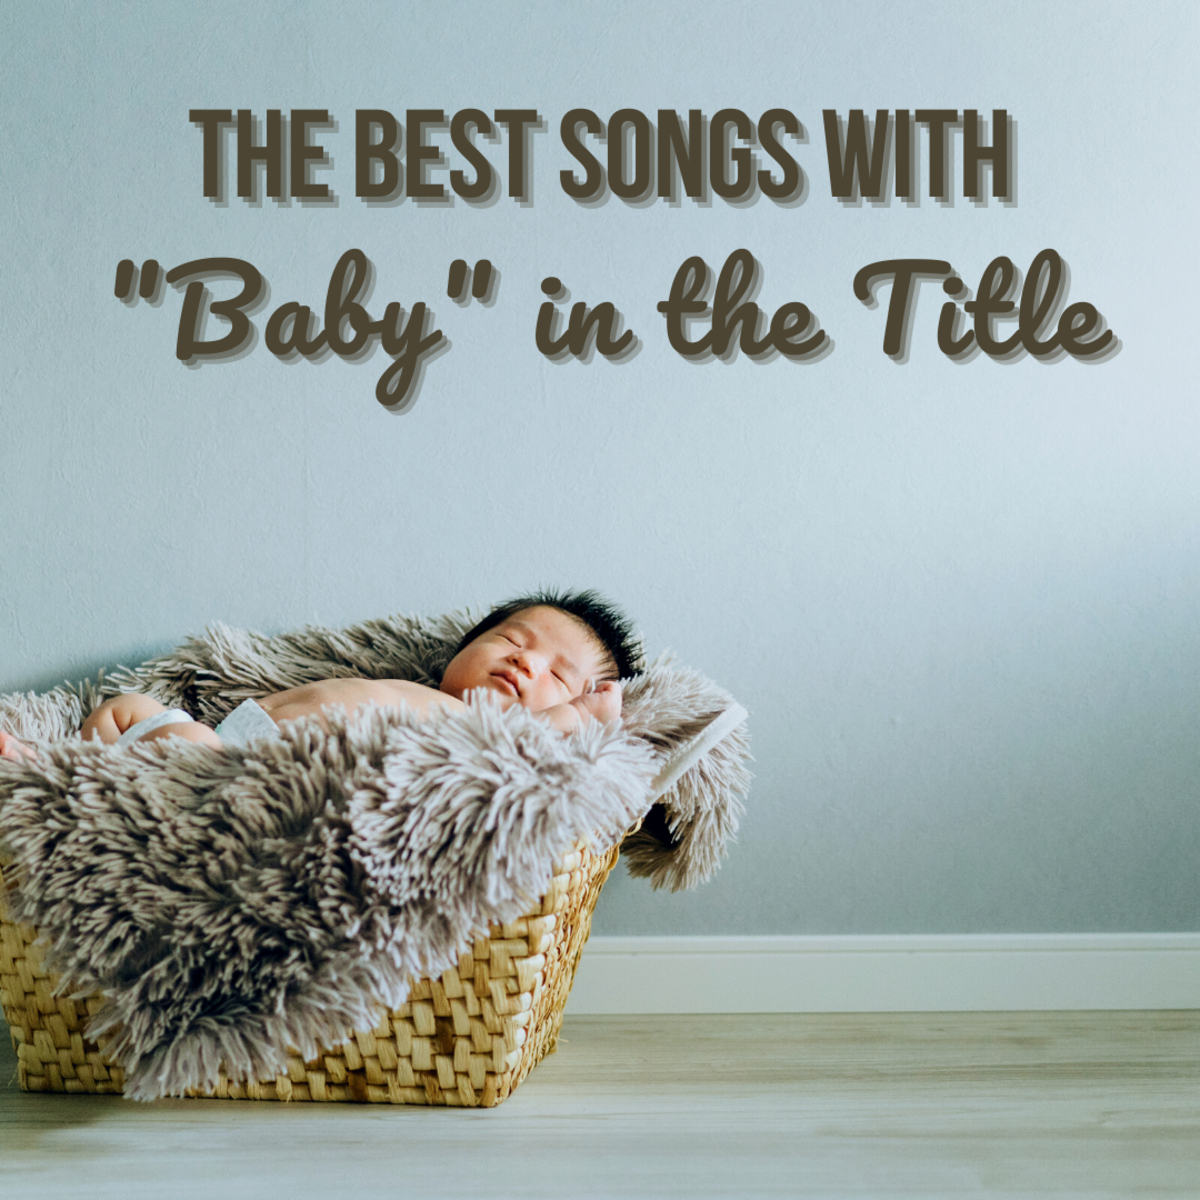 Here is a playlist of songs with "baby" in the title.